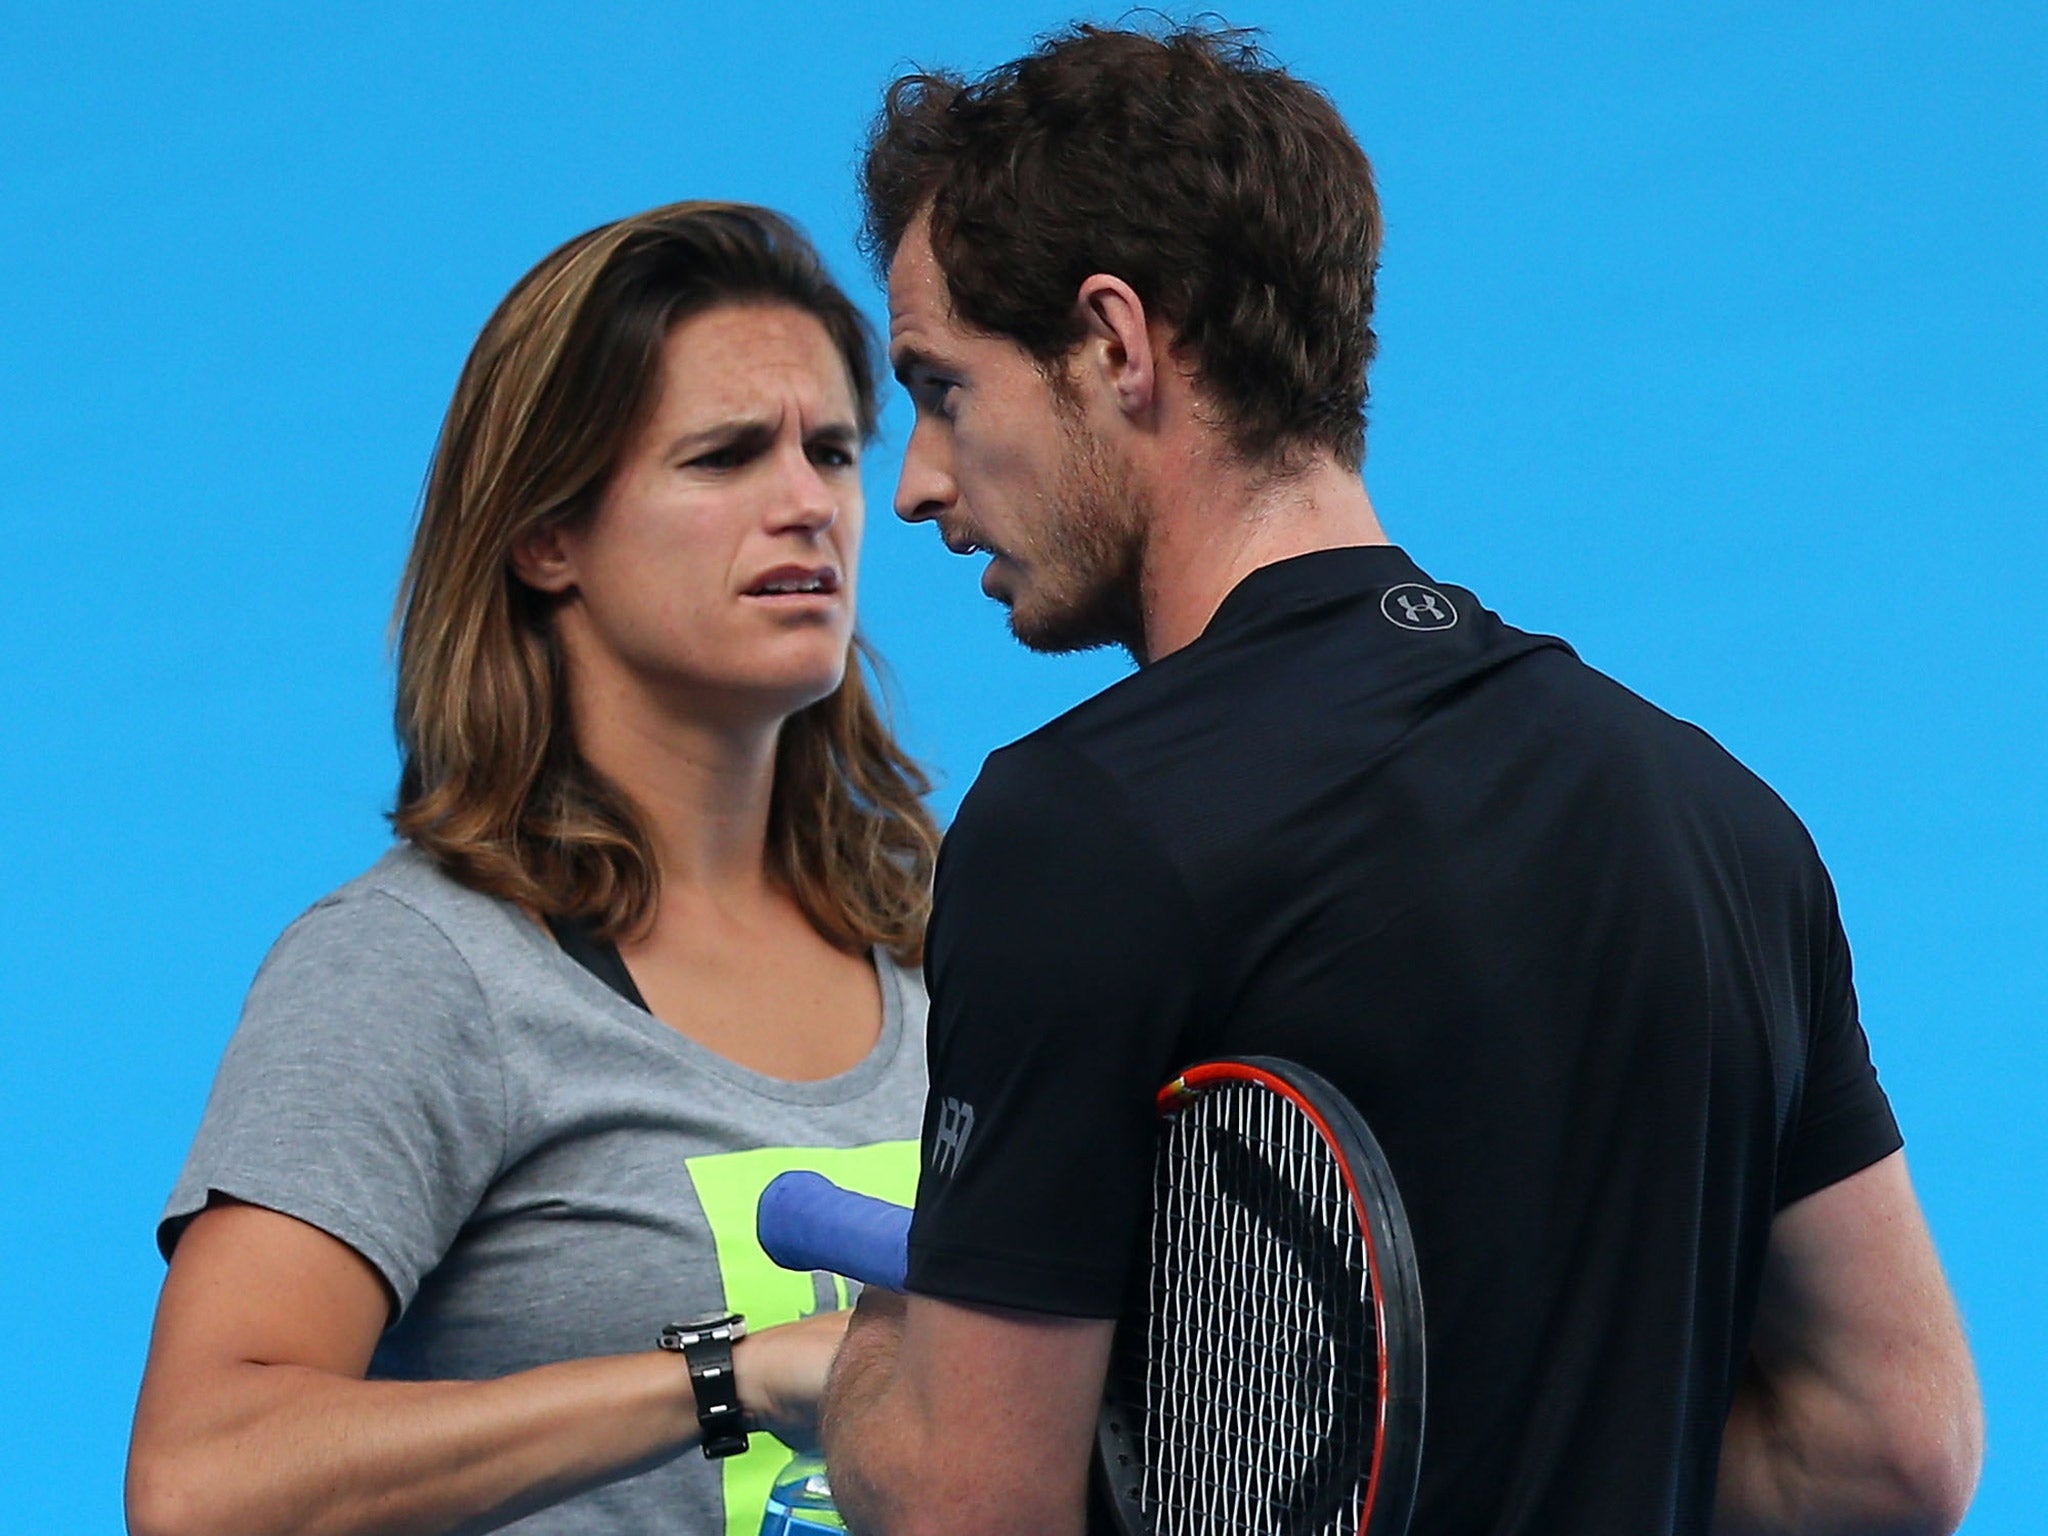 Andy Murray rejected claims of a row with his coach Amelie Mauresmo